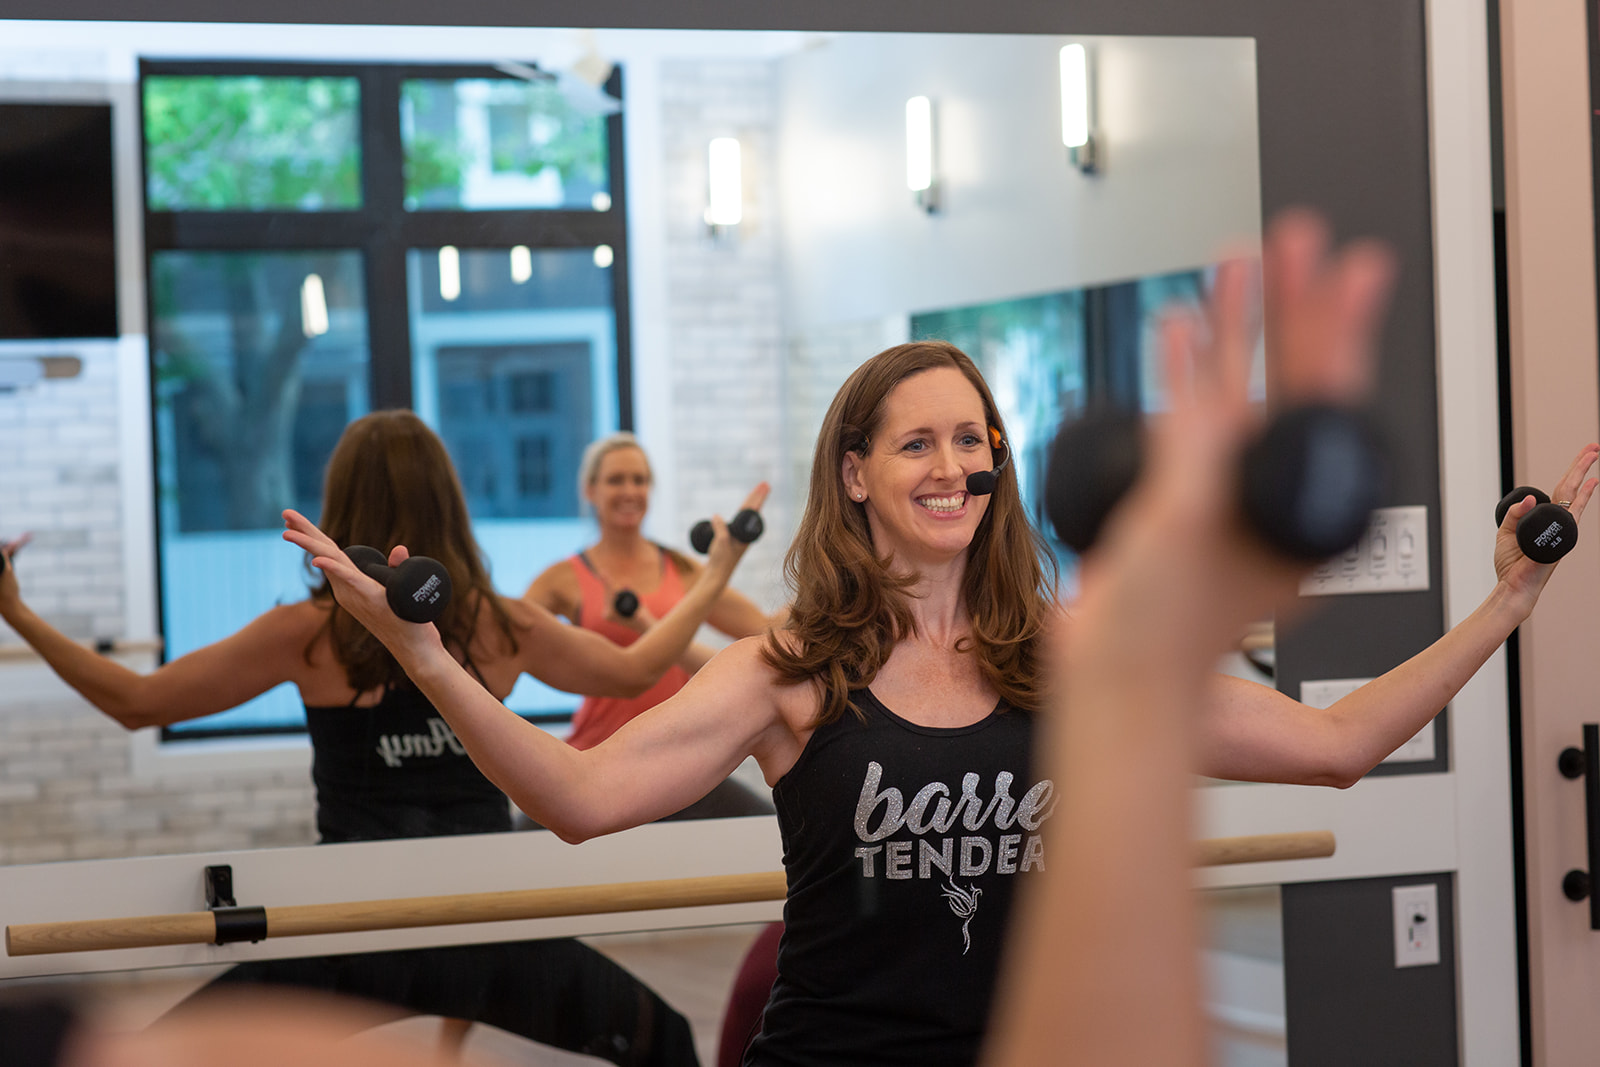 gym owner leading barre class for branding photos